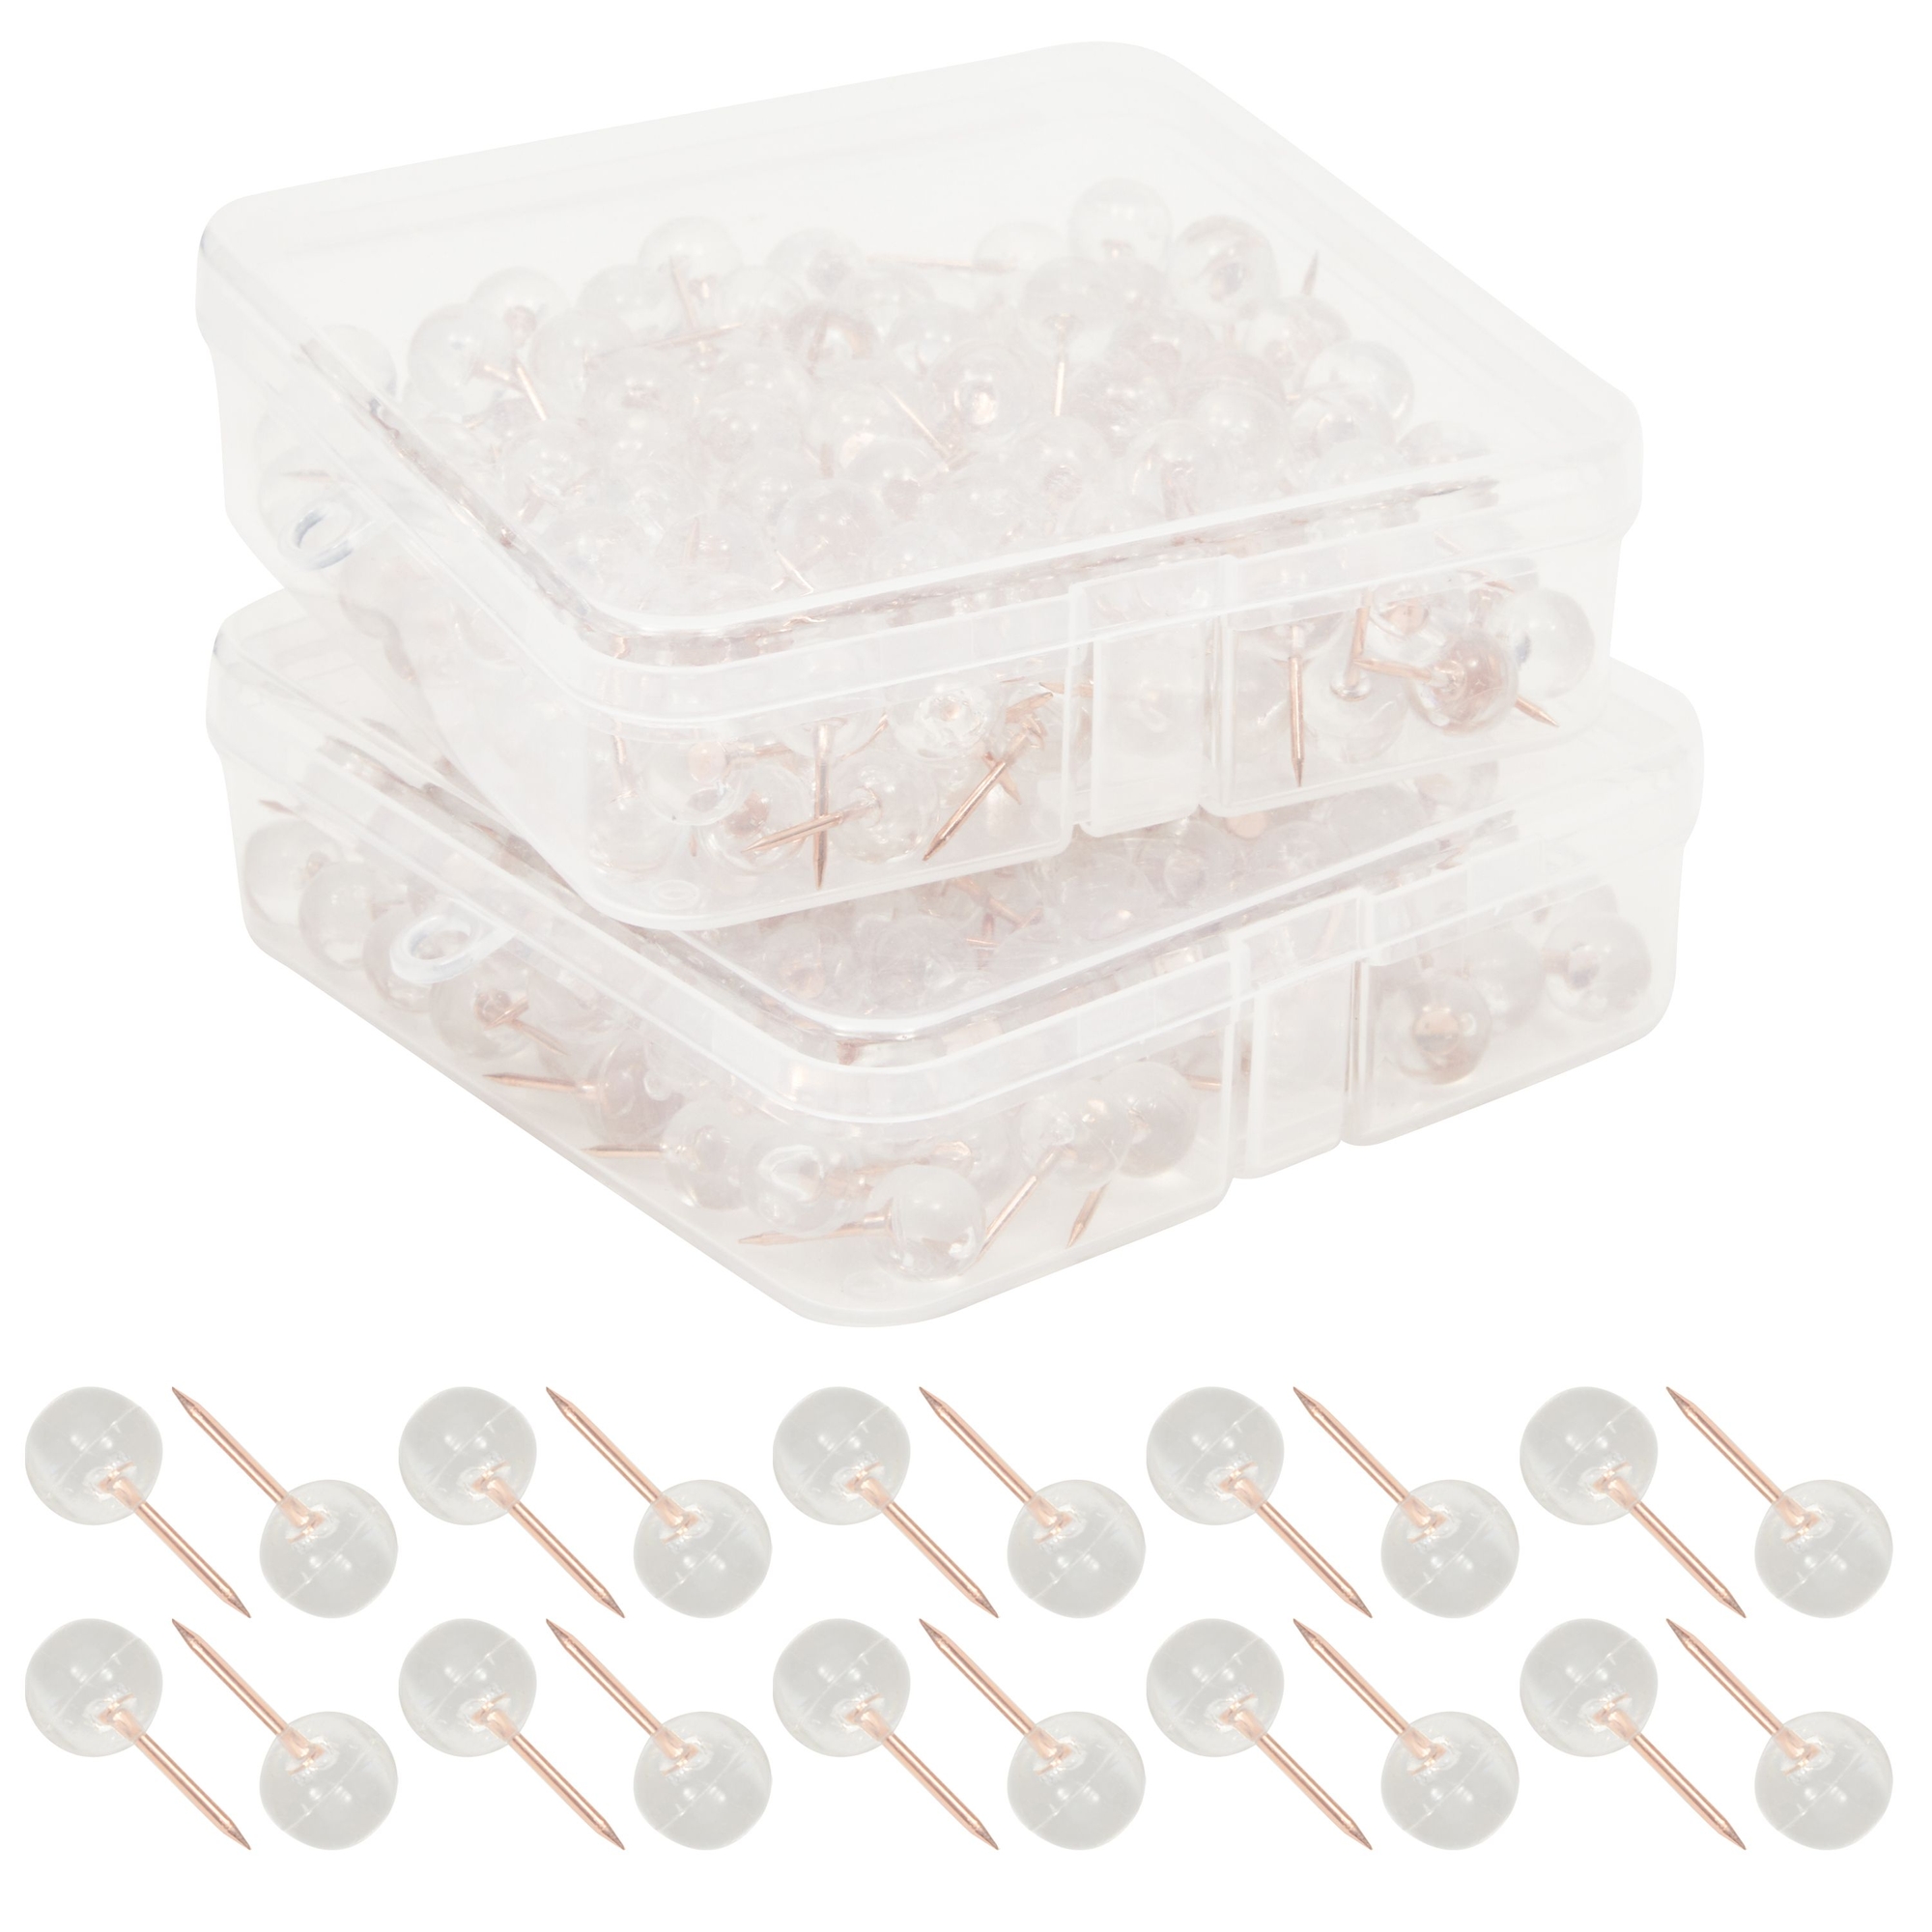 300 count Cute Decorative Clear Push Pins for Cork Bulletin Boards